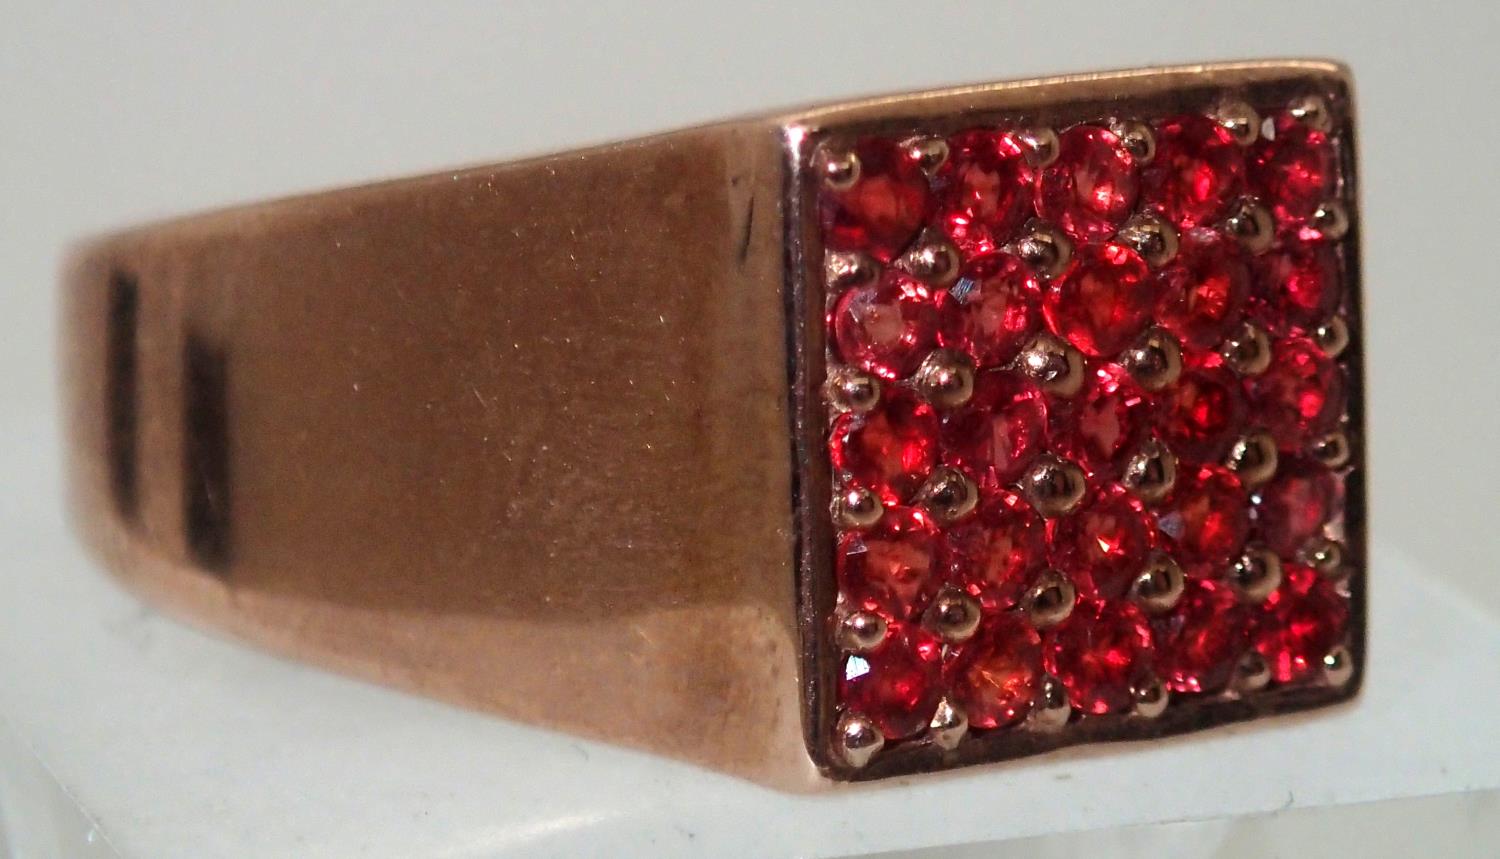 Gents 9ct rose gold 25 set garnet ring size W. P&P group 1 (£16 for the first item and £1.50 for